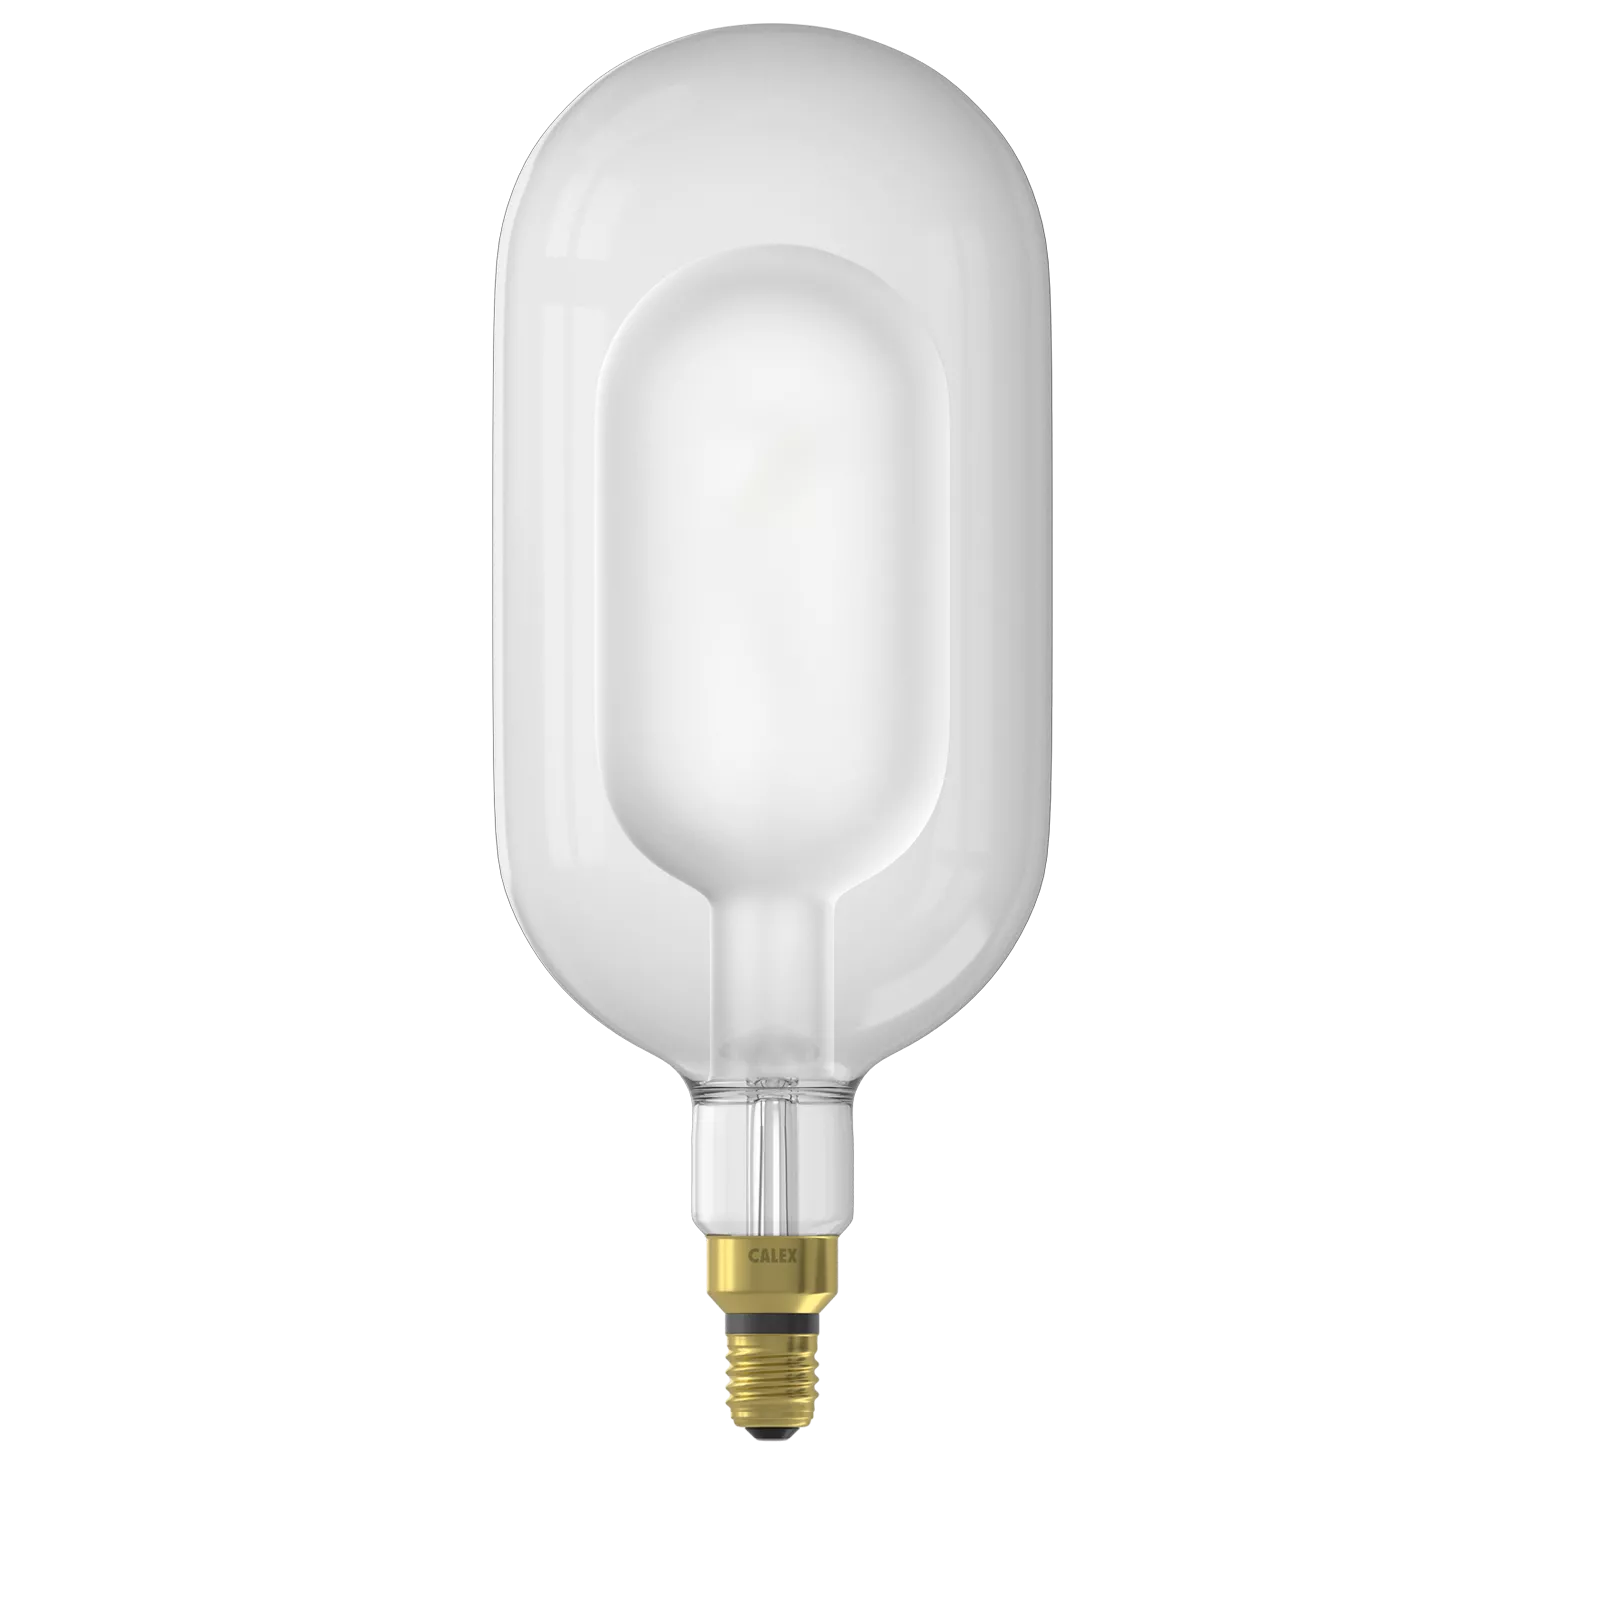 LED lamp Sundsvall - Frosted